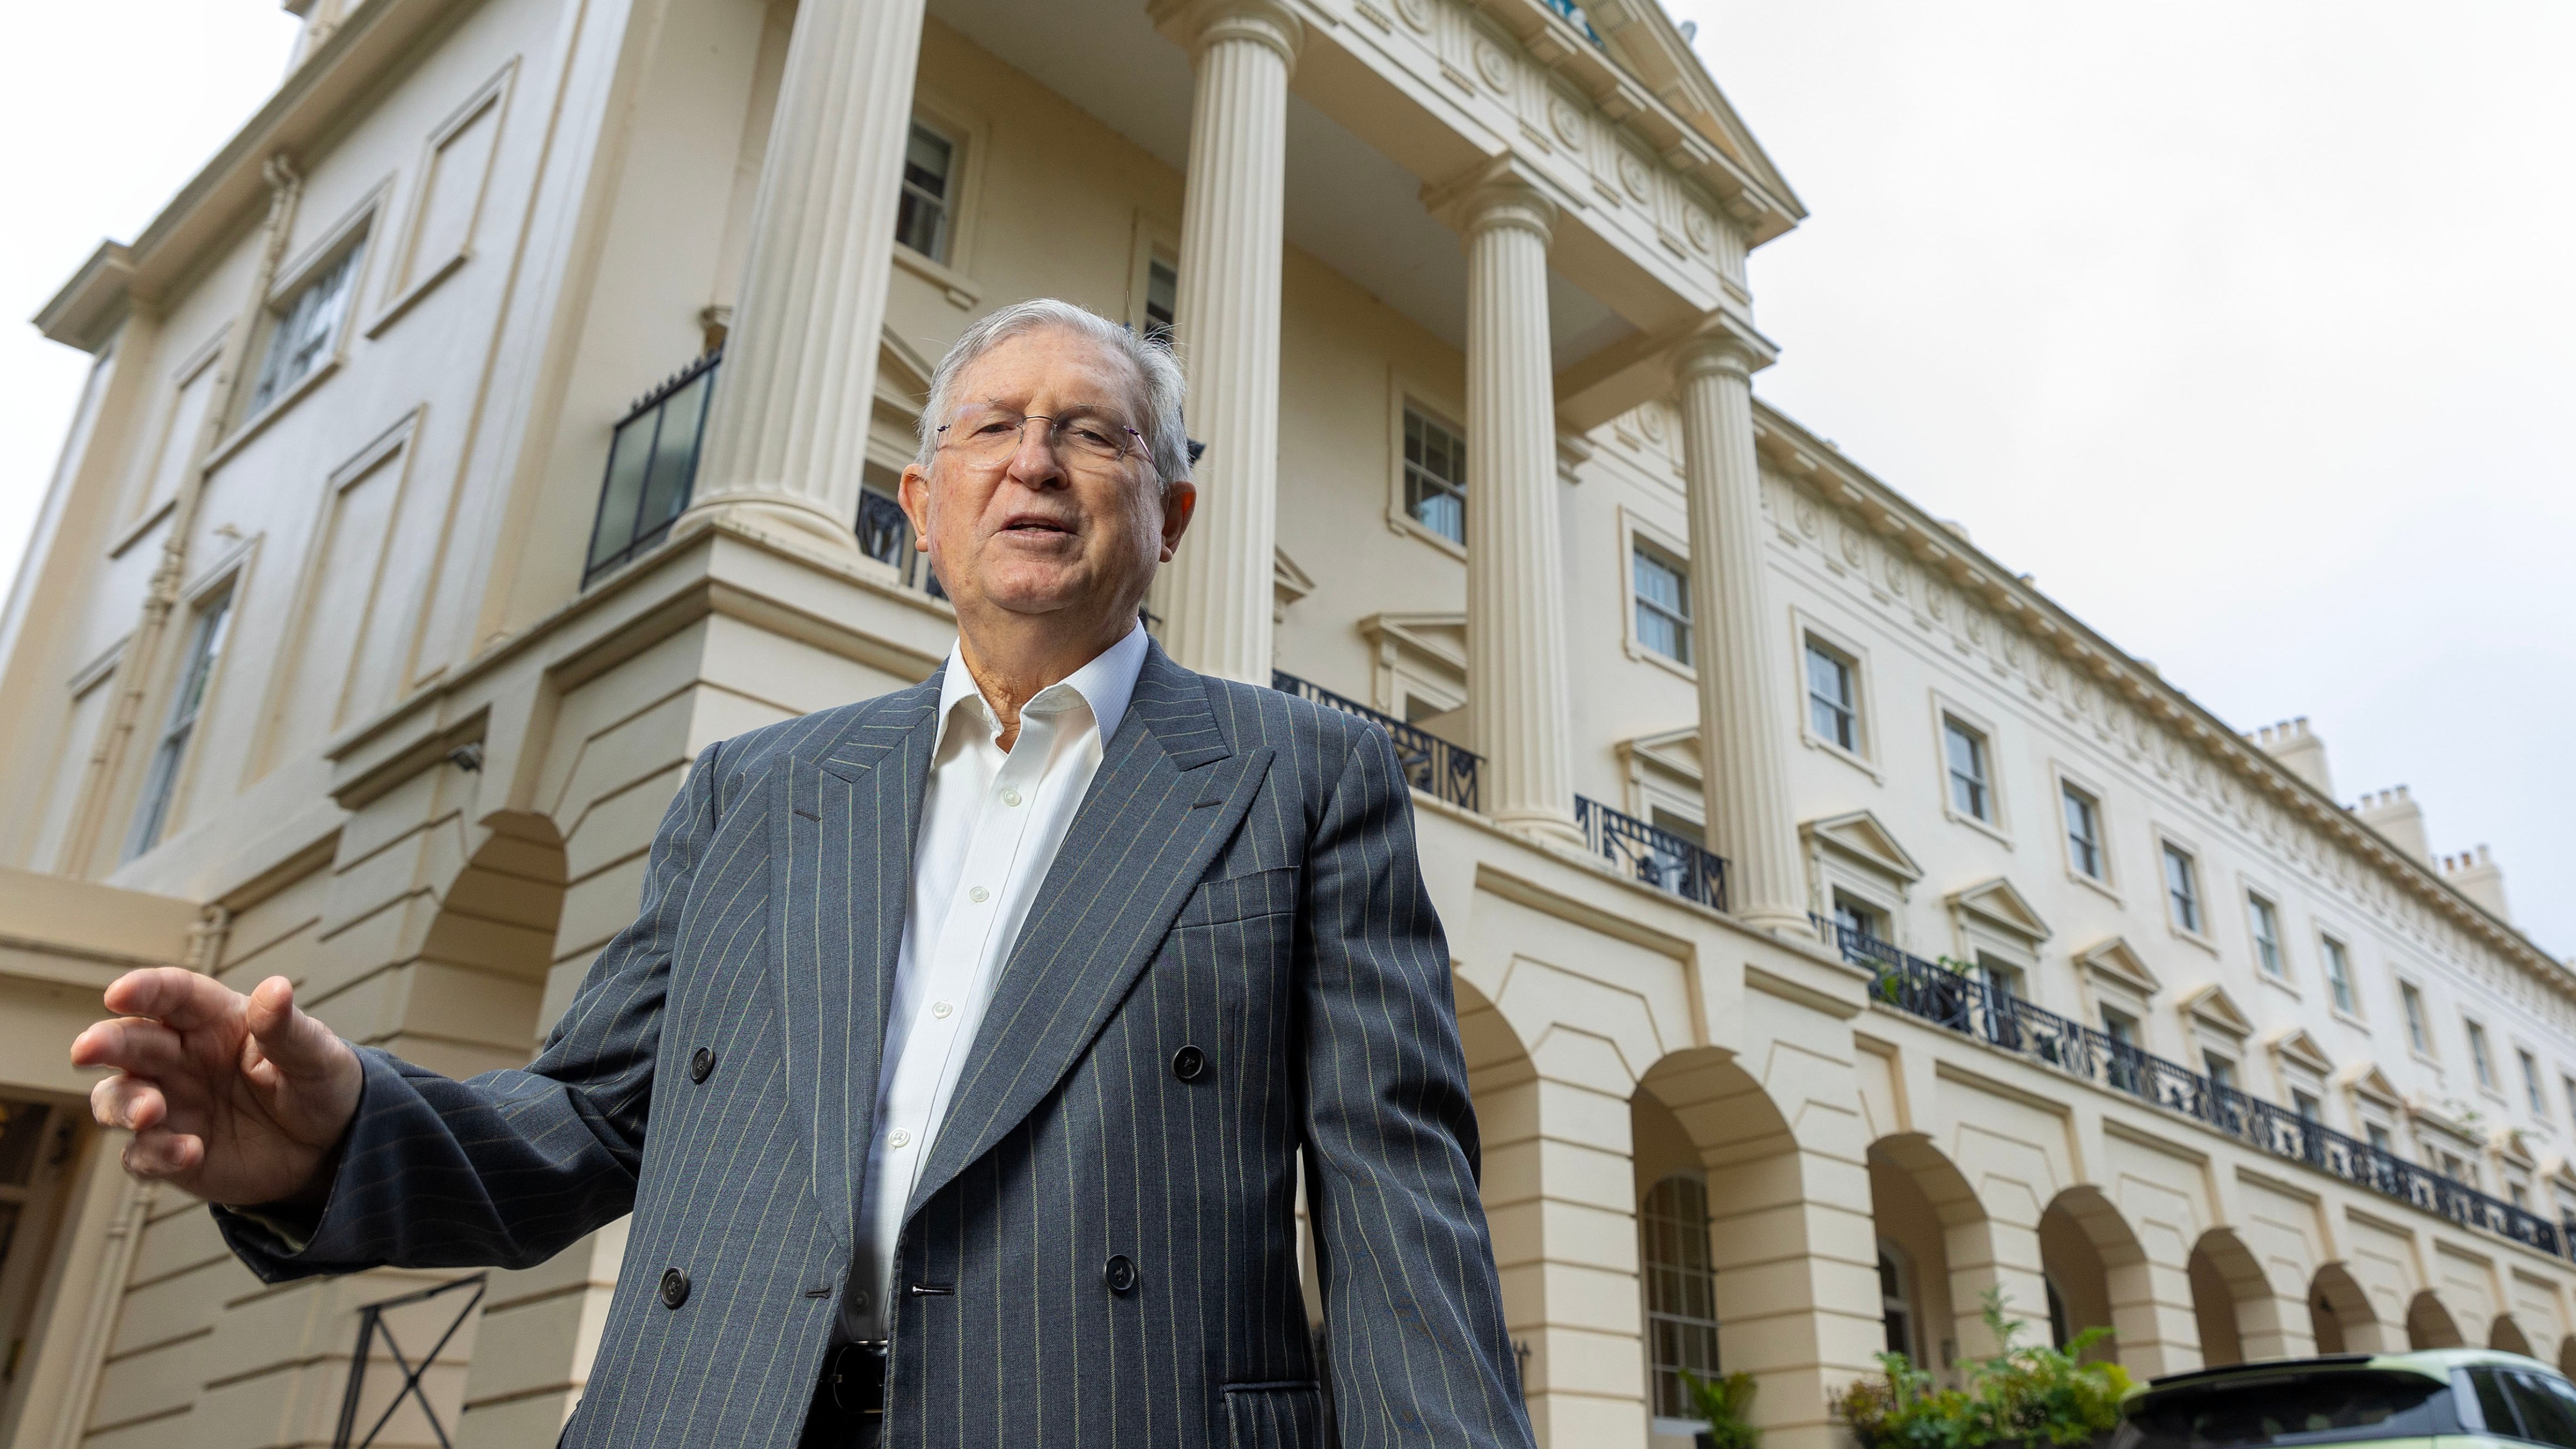 John Griffin outside his grade I listed mansion on Hanover Terrace